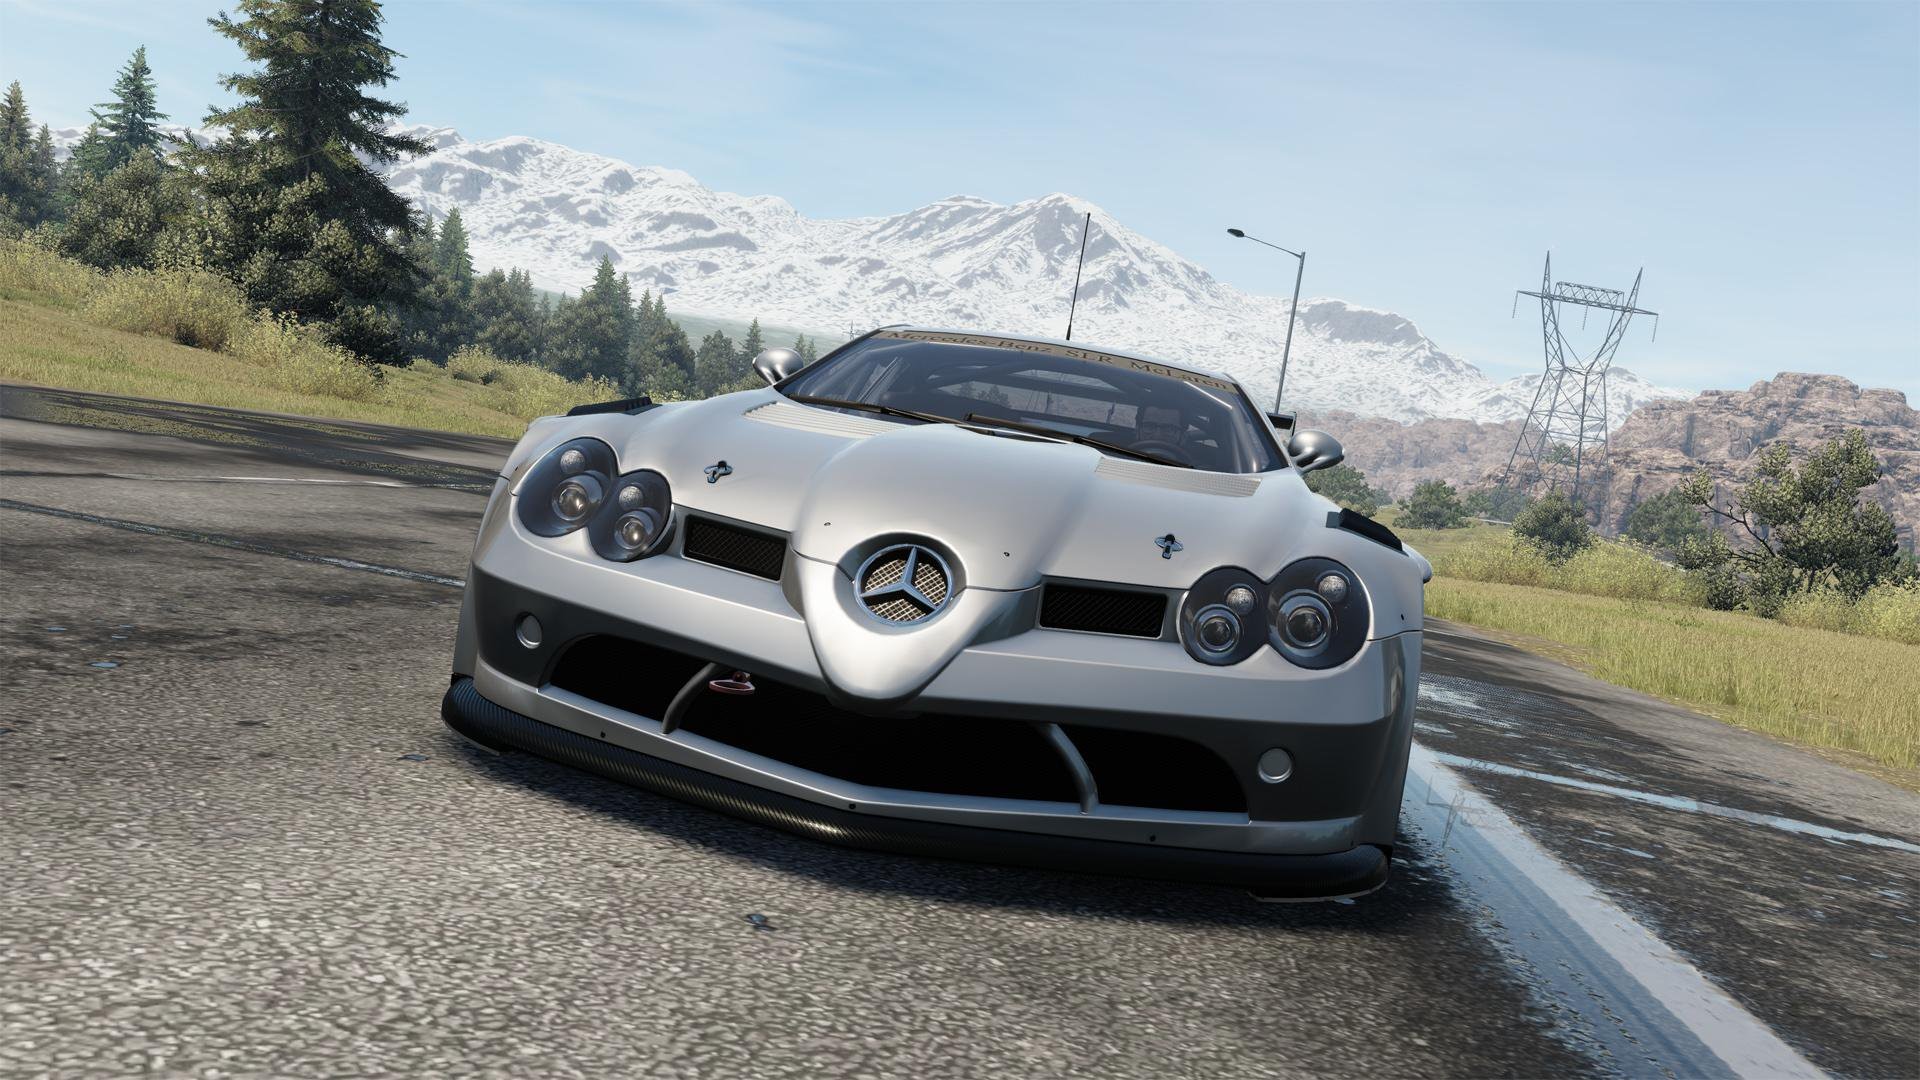 1920x1080 The Crew 2 on Twitter: "The Mercedes-Benz SLR McLaren 722 is also coming to  The Crew Wild Run! @MercedesBenz http://t.co/ydAhoomdoR"